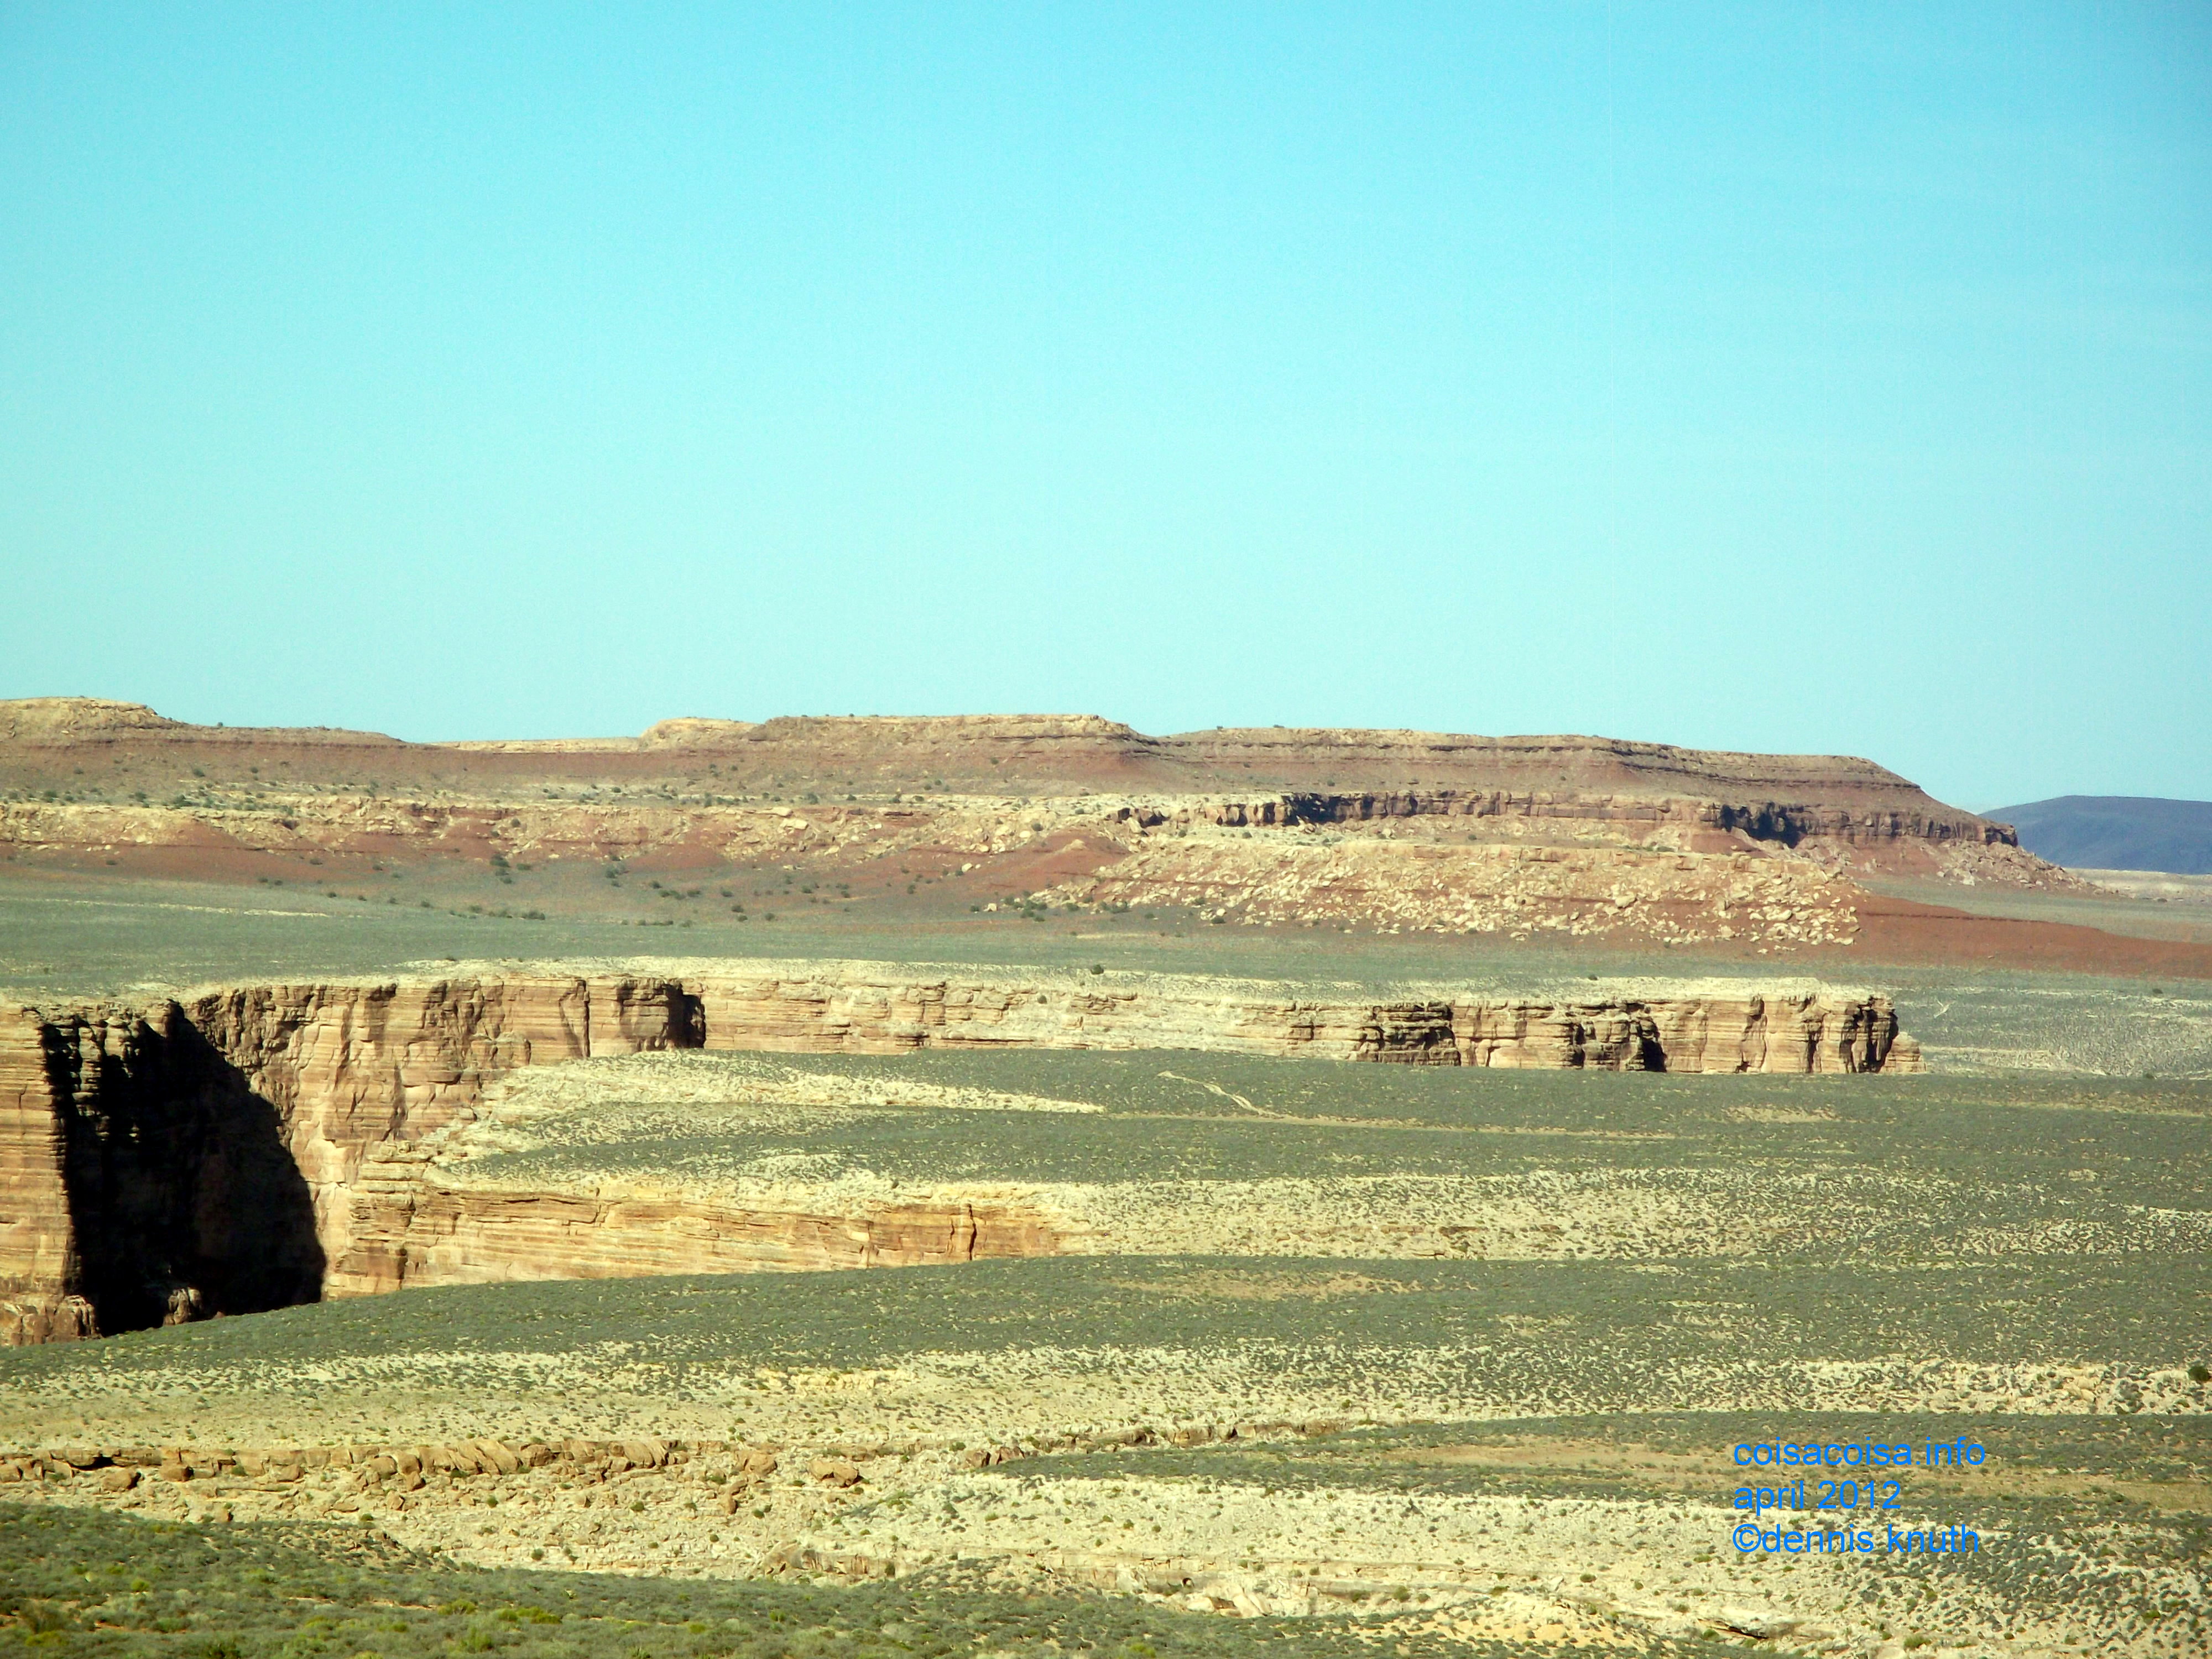 A little Grand Canyon parses part of the painted desert